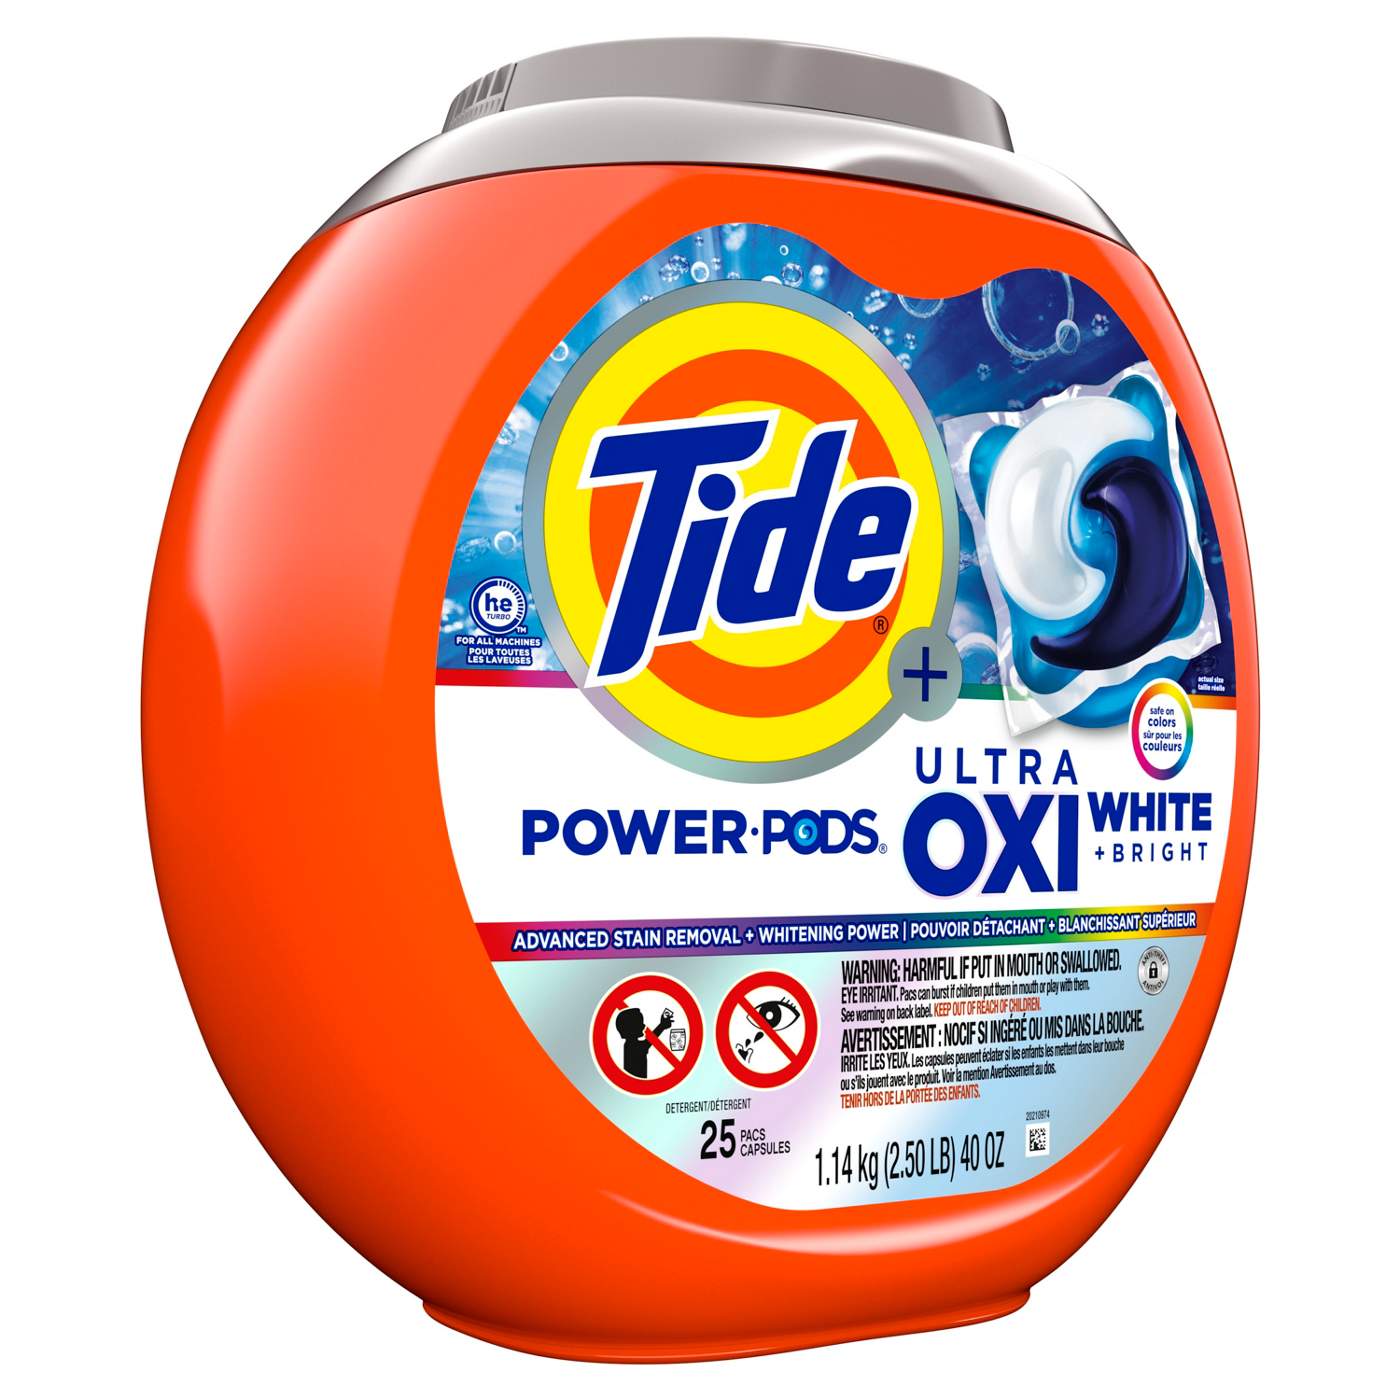 Tide Power PODS Ultra Oxi White & Bright Laundry Detergent Pacs; image 8 of 9